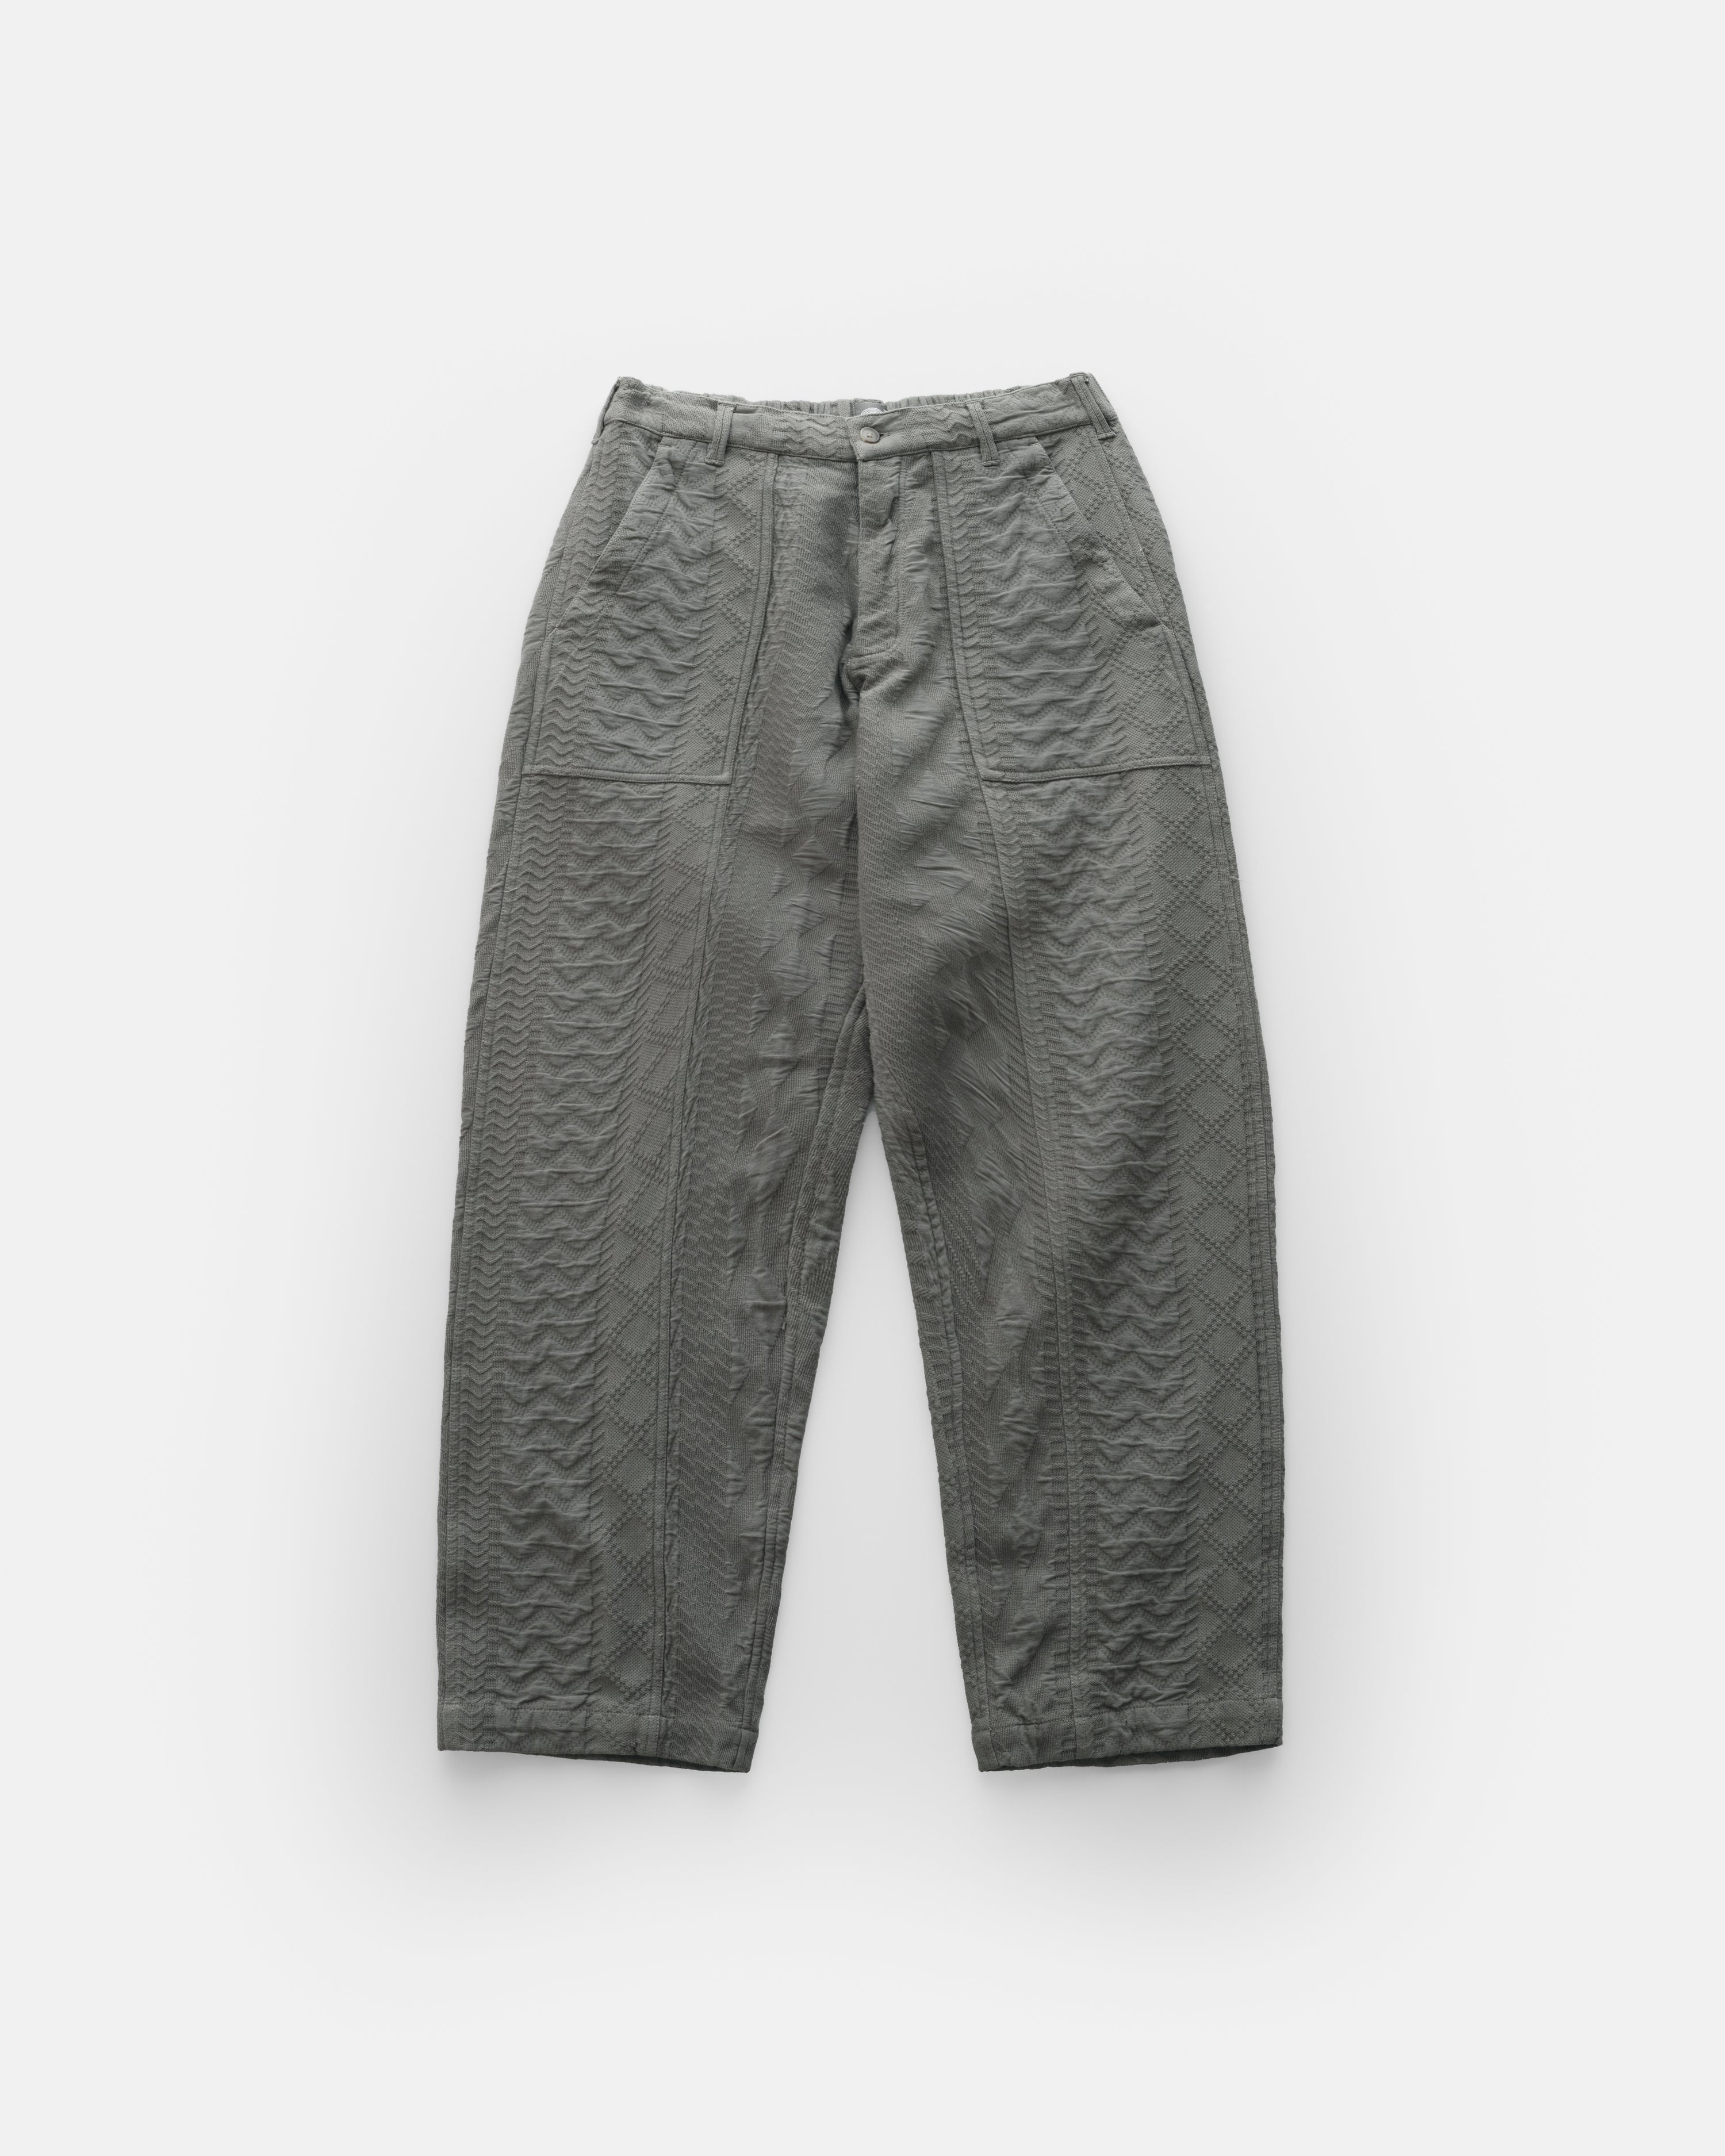 ROY BAKER PANT - MULLED BASIL DOUBLE WEAVE COTTON